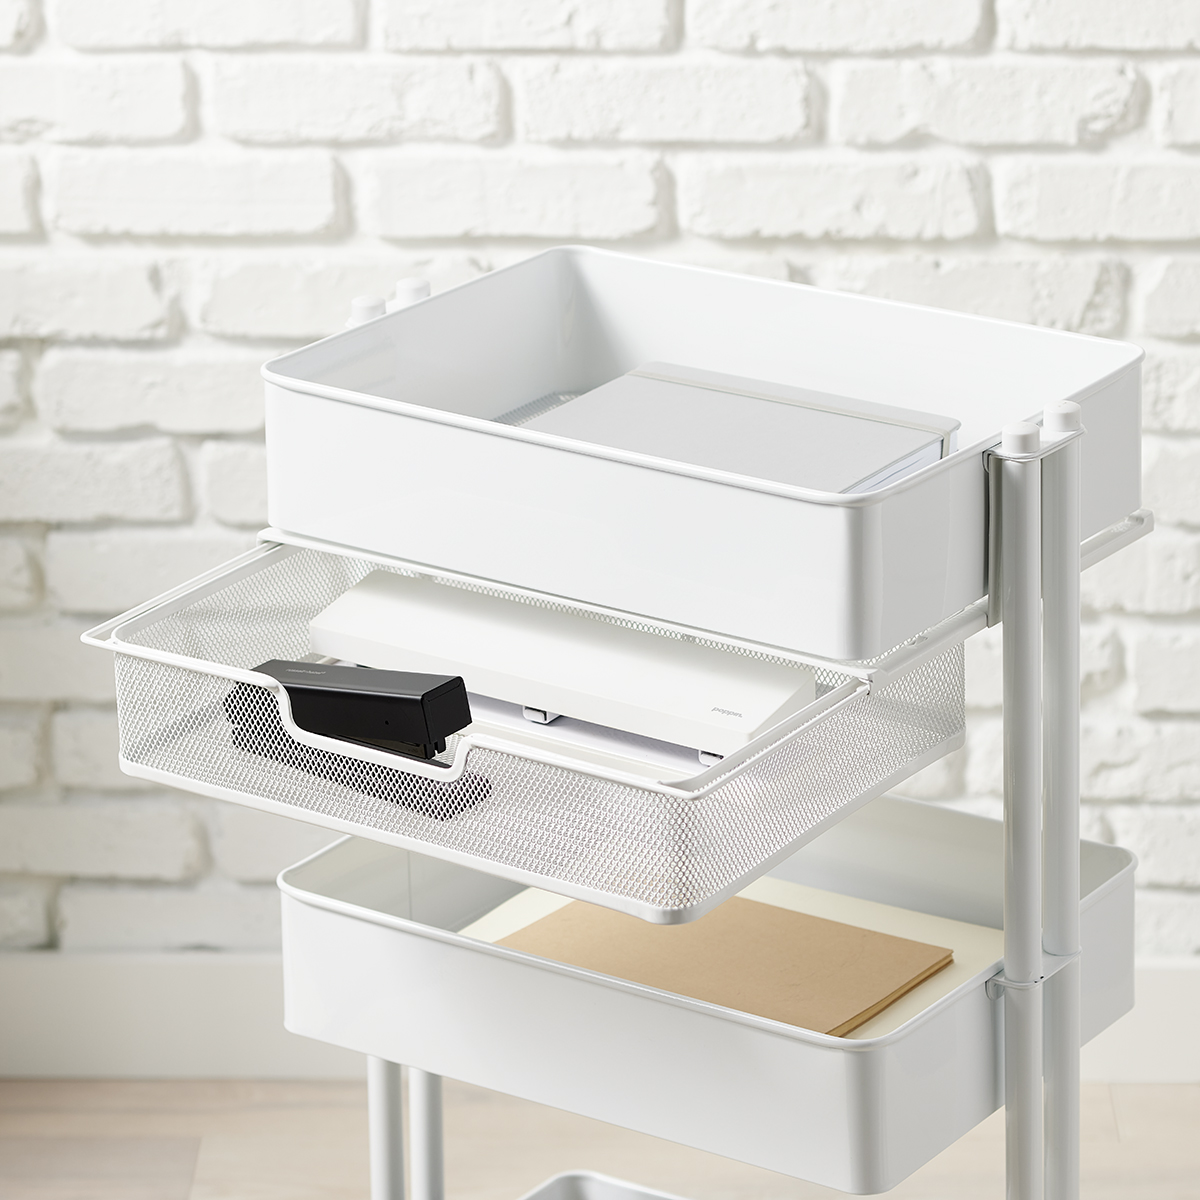 https://www.containerstore.com/catalogimages/483299/10092570-deep-3-tier-cart-drawer-PVL.jpg